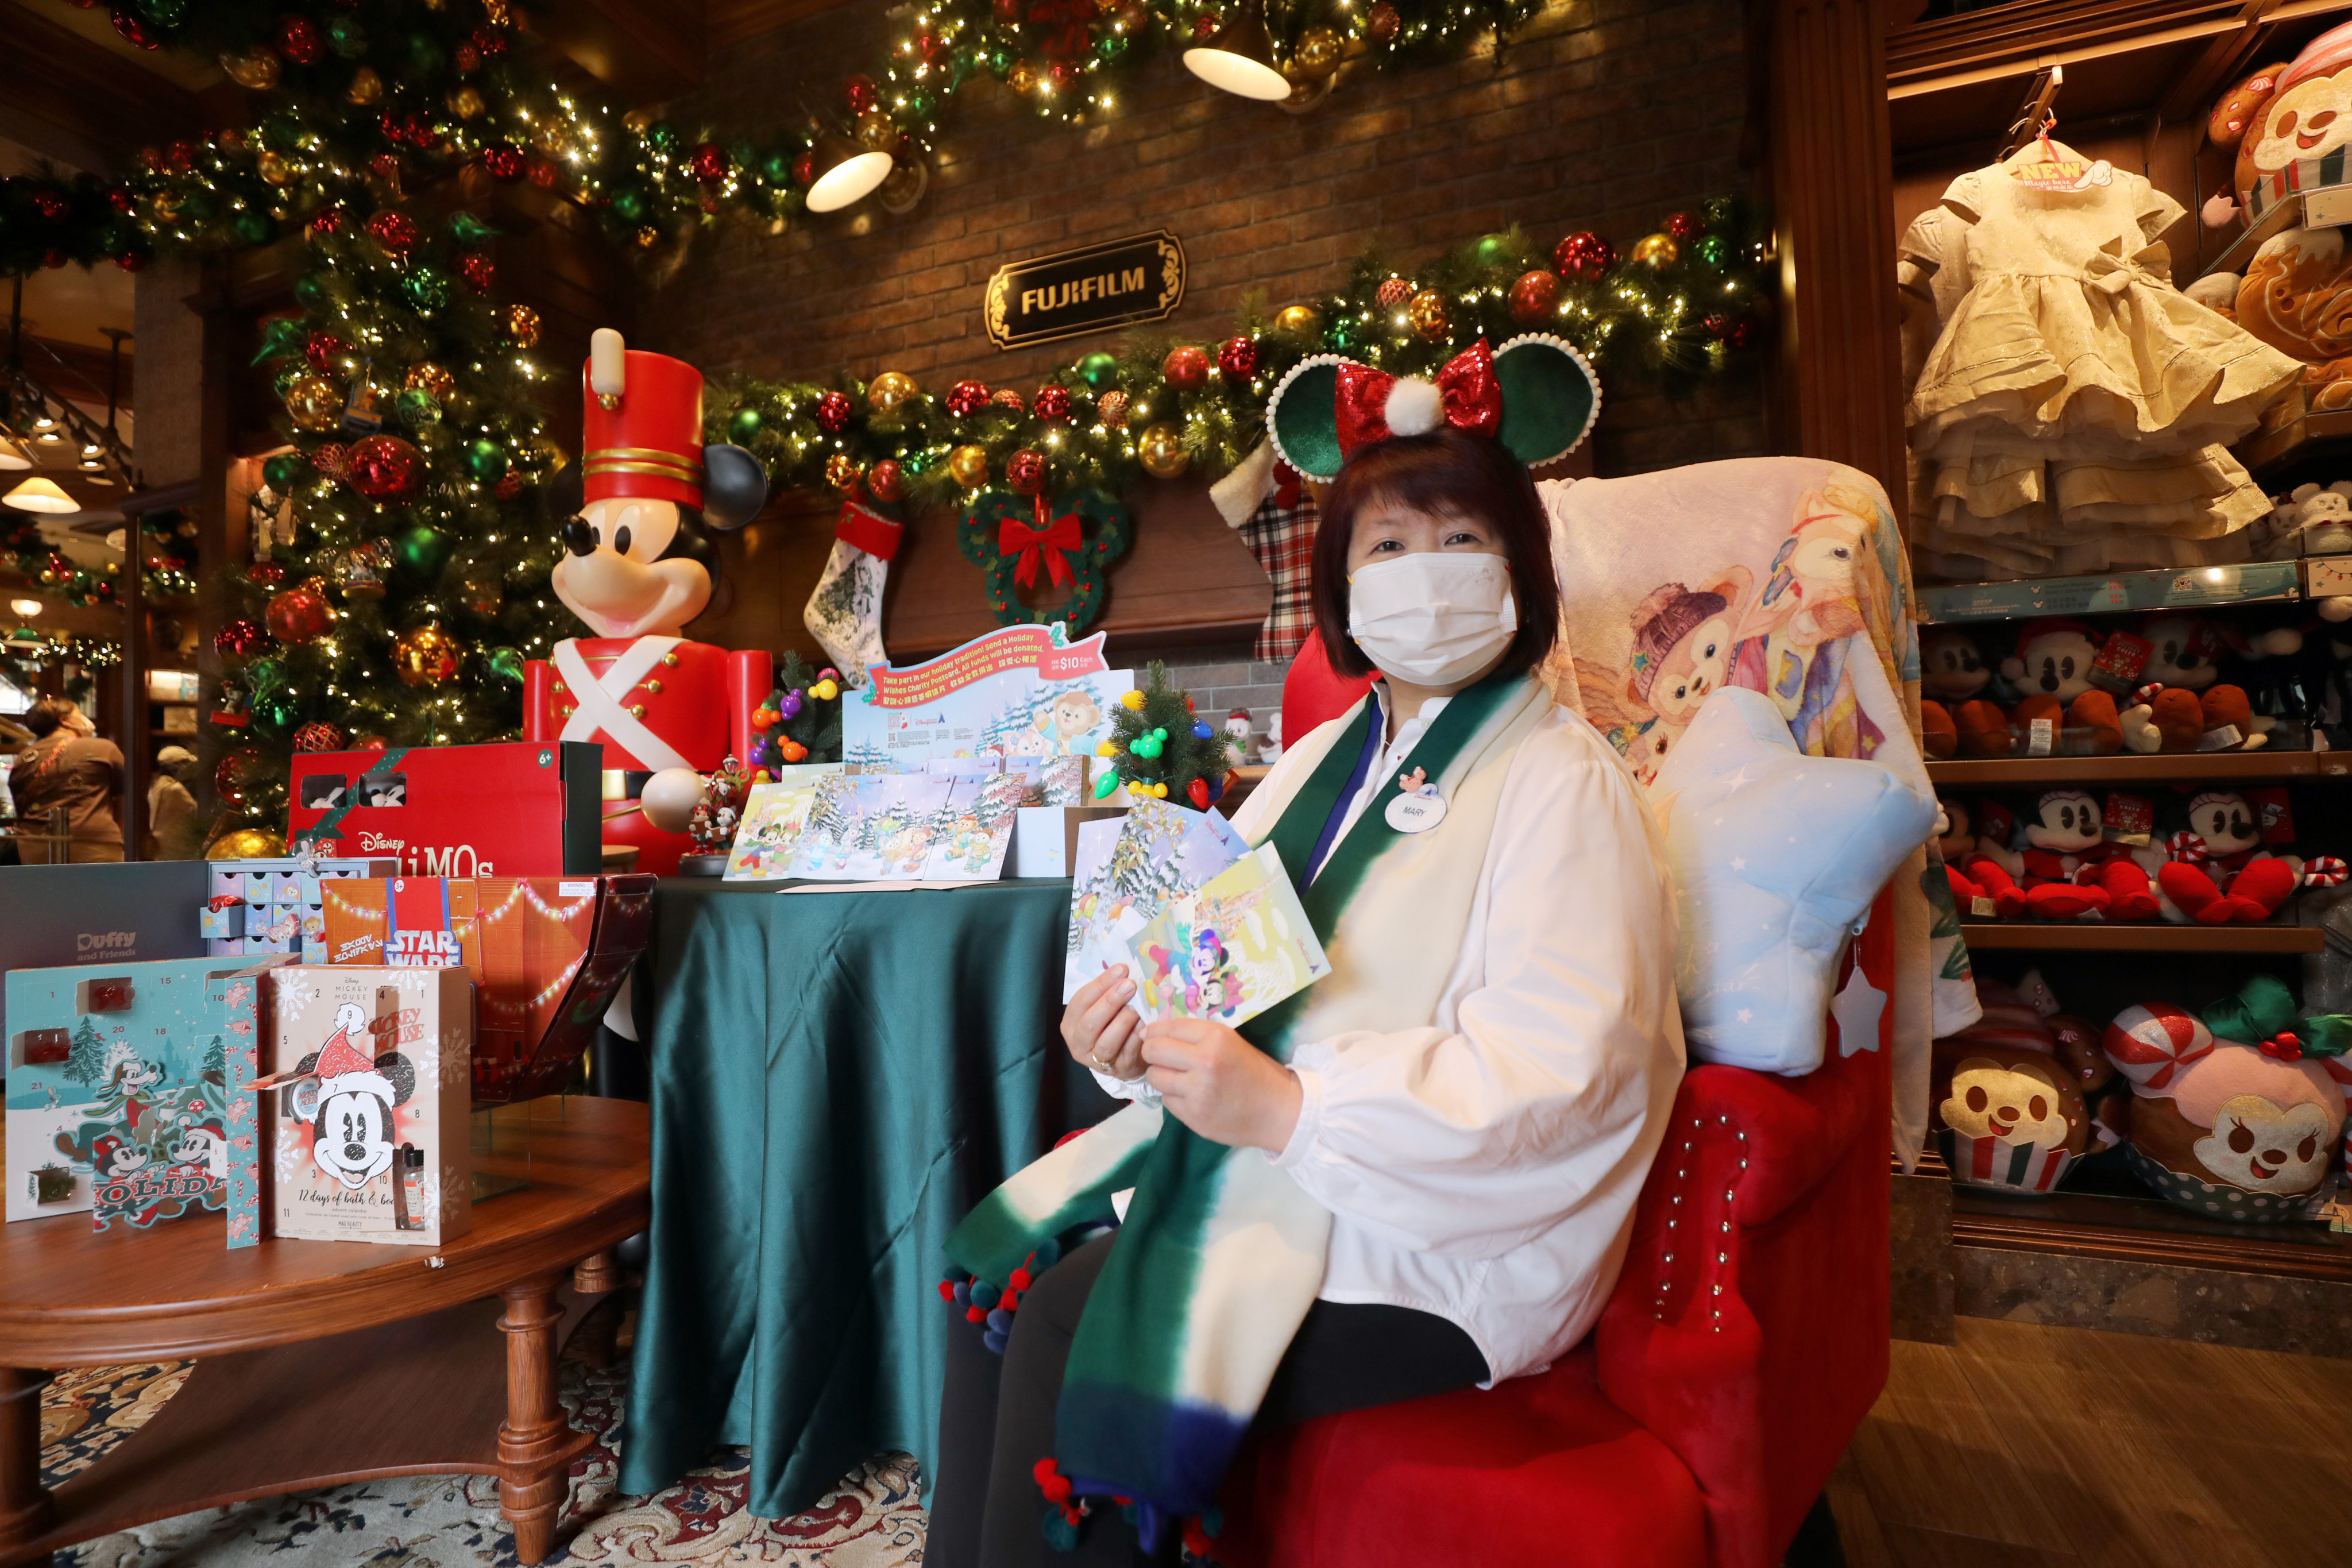 Mary Lam, the director of merchandise at Hong Kong Disneyland Resort, shows off some of the charity postcards available to support Operation Santa Claus. Photo: Xiaomei Chen